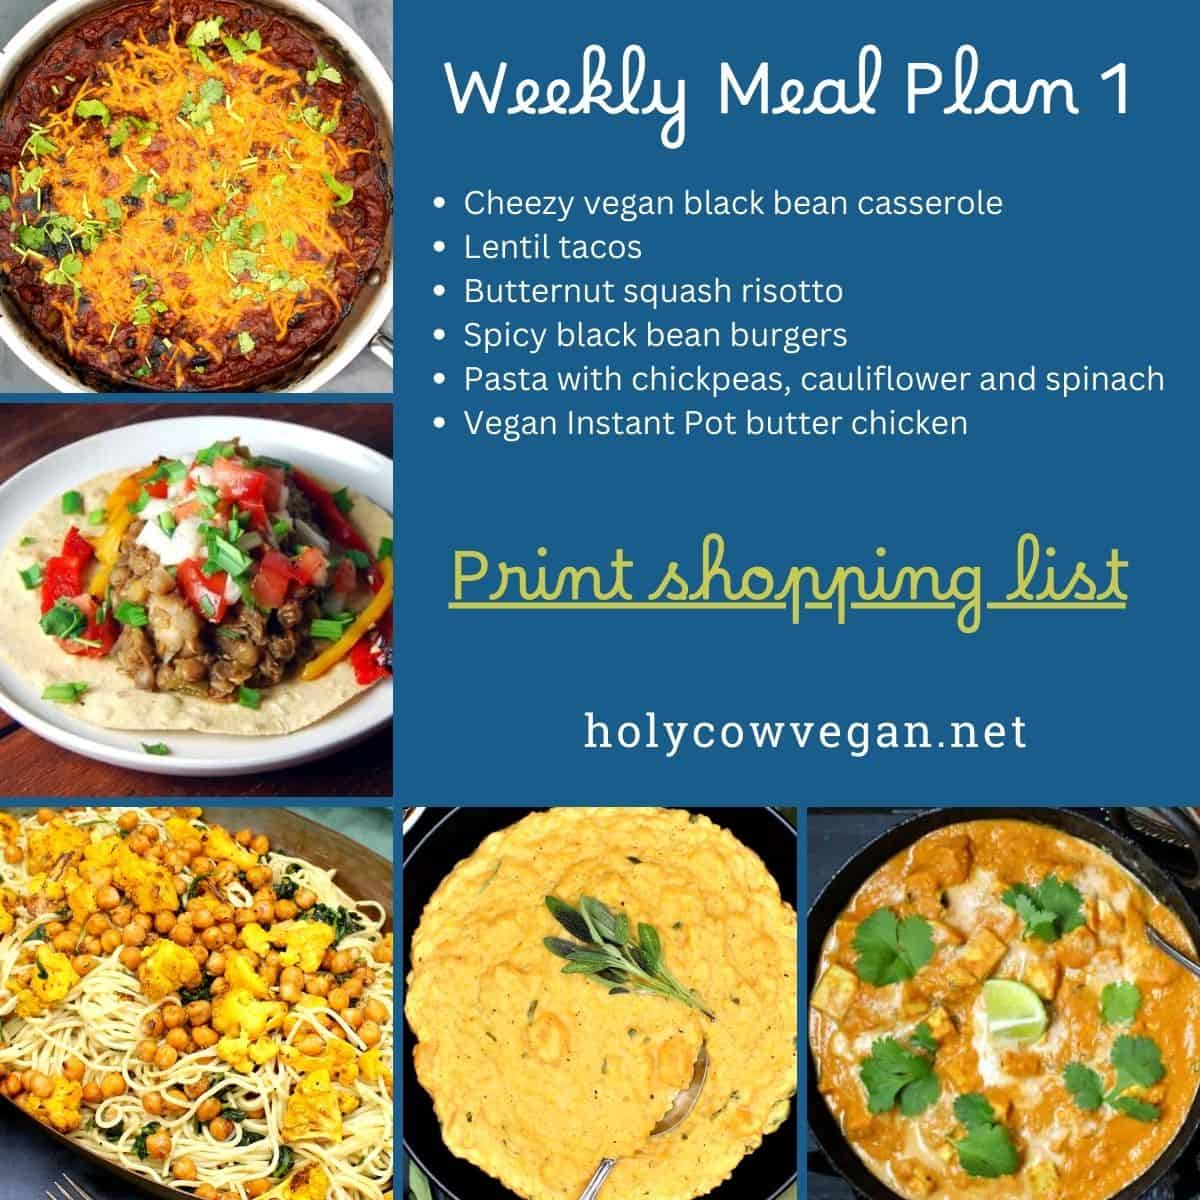 Weekly meal plan clickable shopping list graphic.